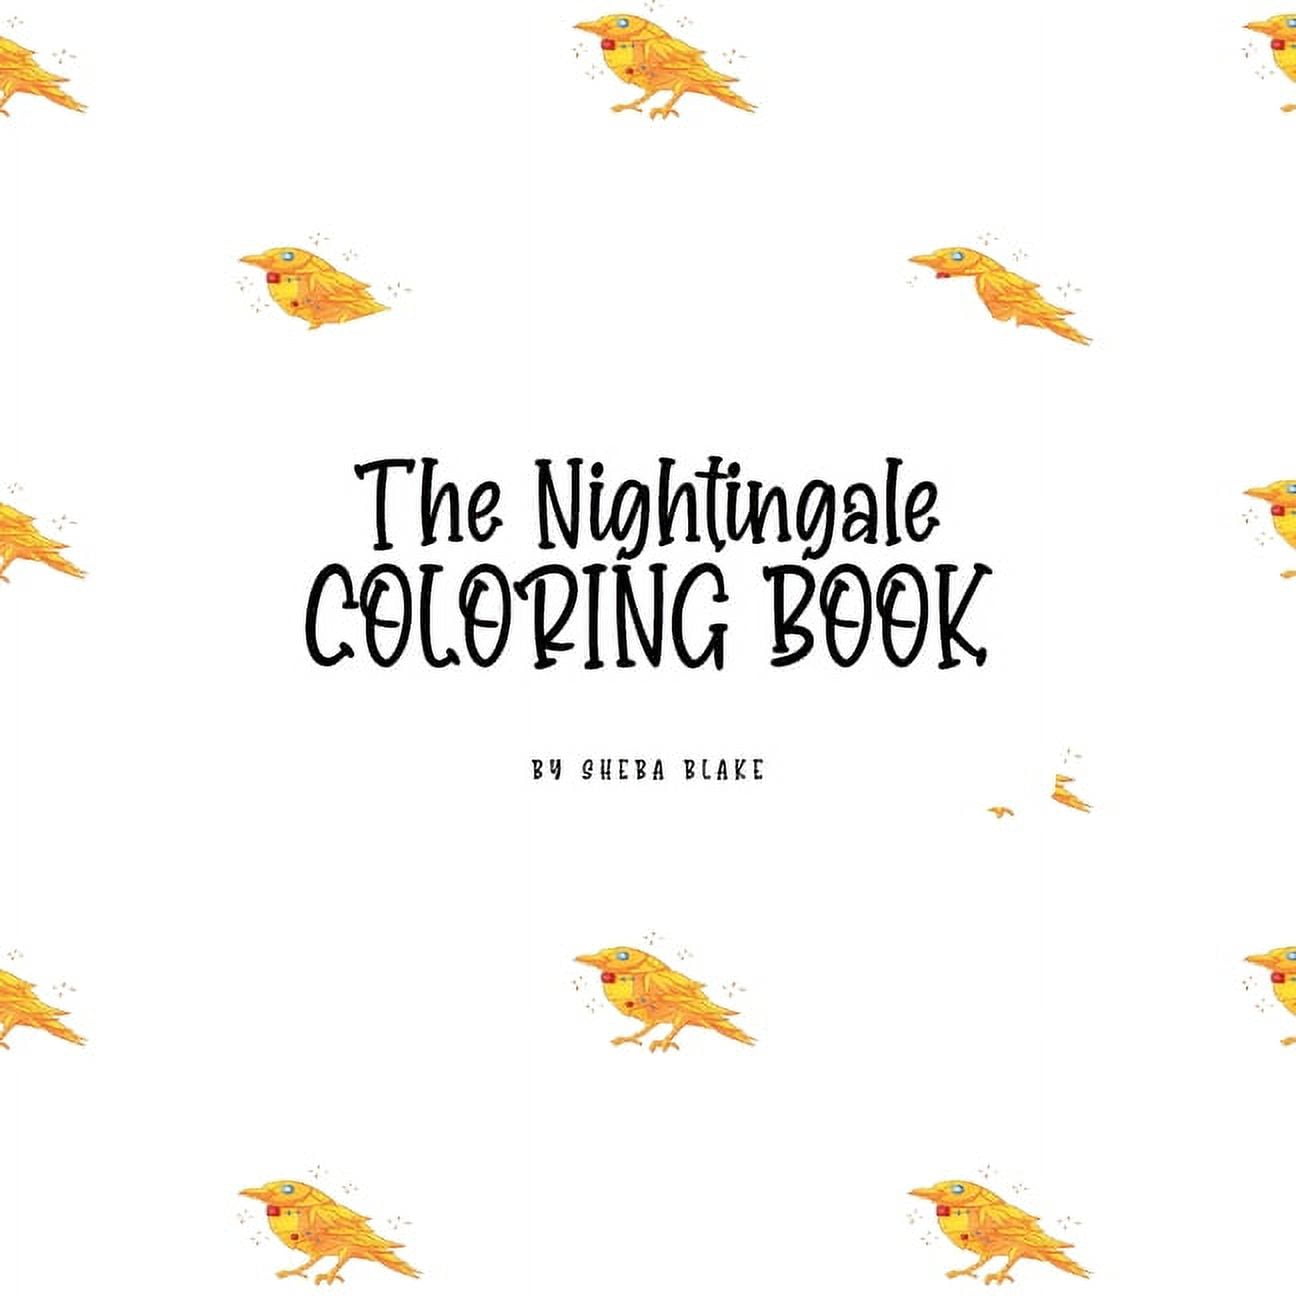 The nightingale coloring book for children x coloring book activity book paperback